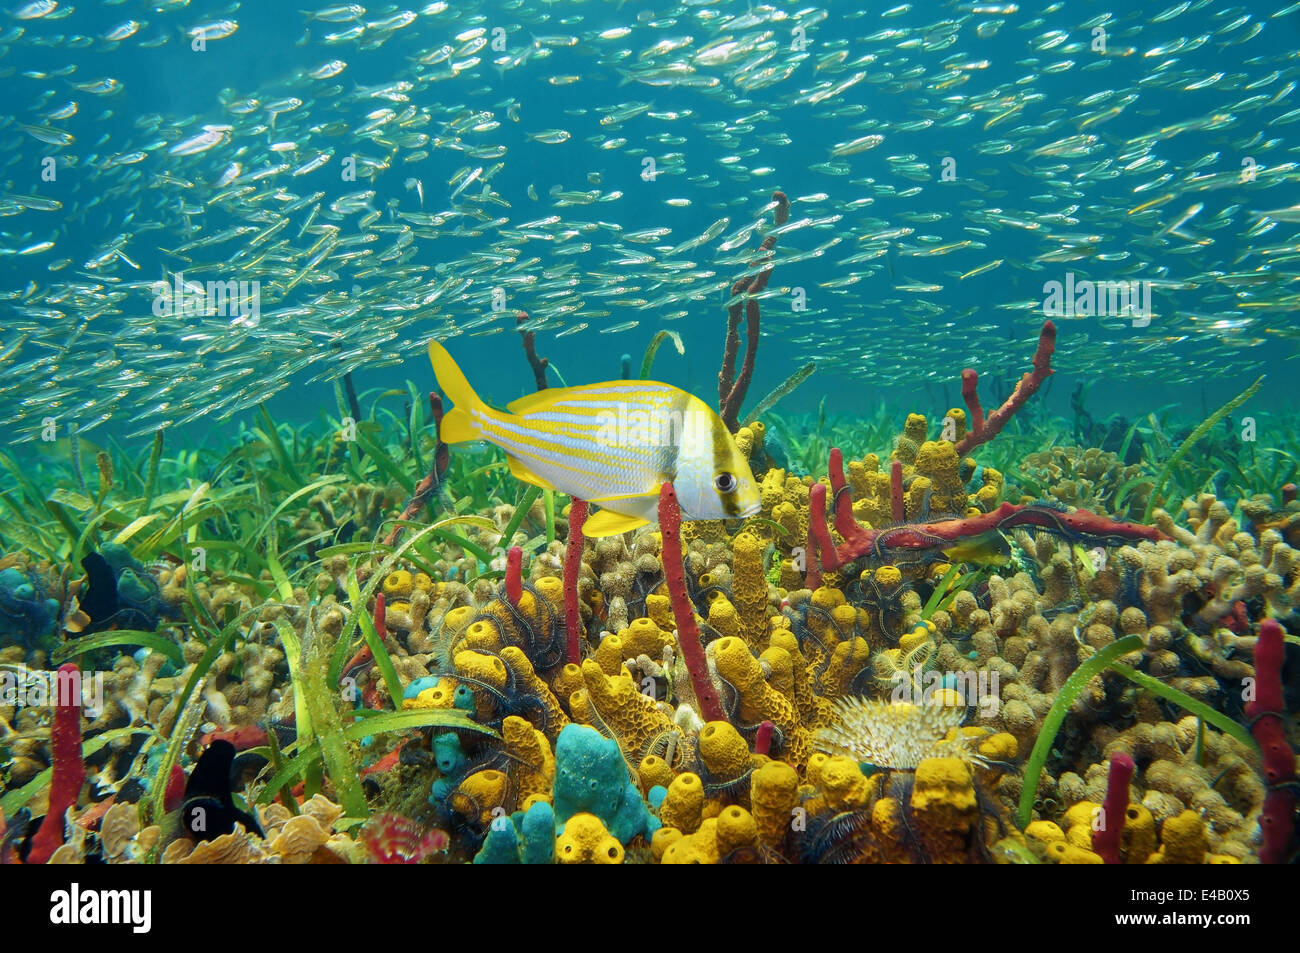 Colorful sea life underwater with sponges, coral and shoal of fish, Caribbean sea Stock Photo